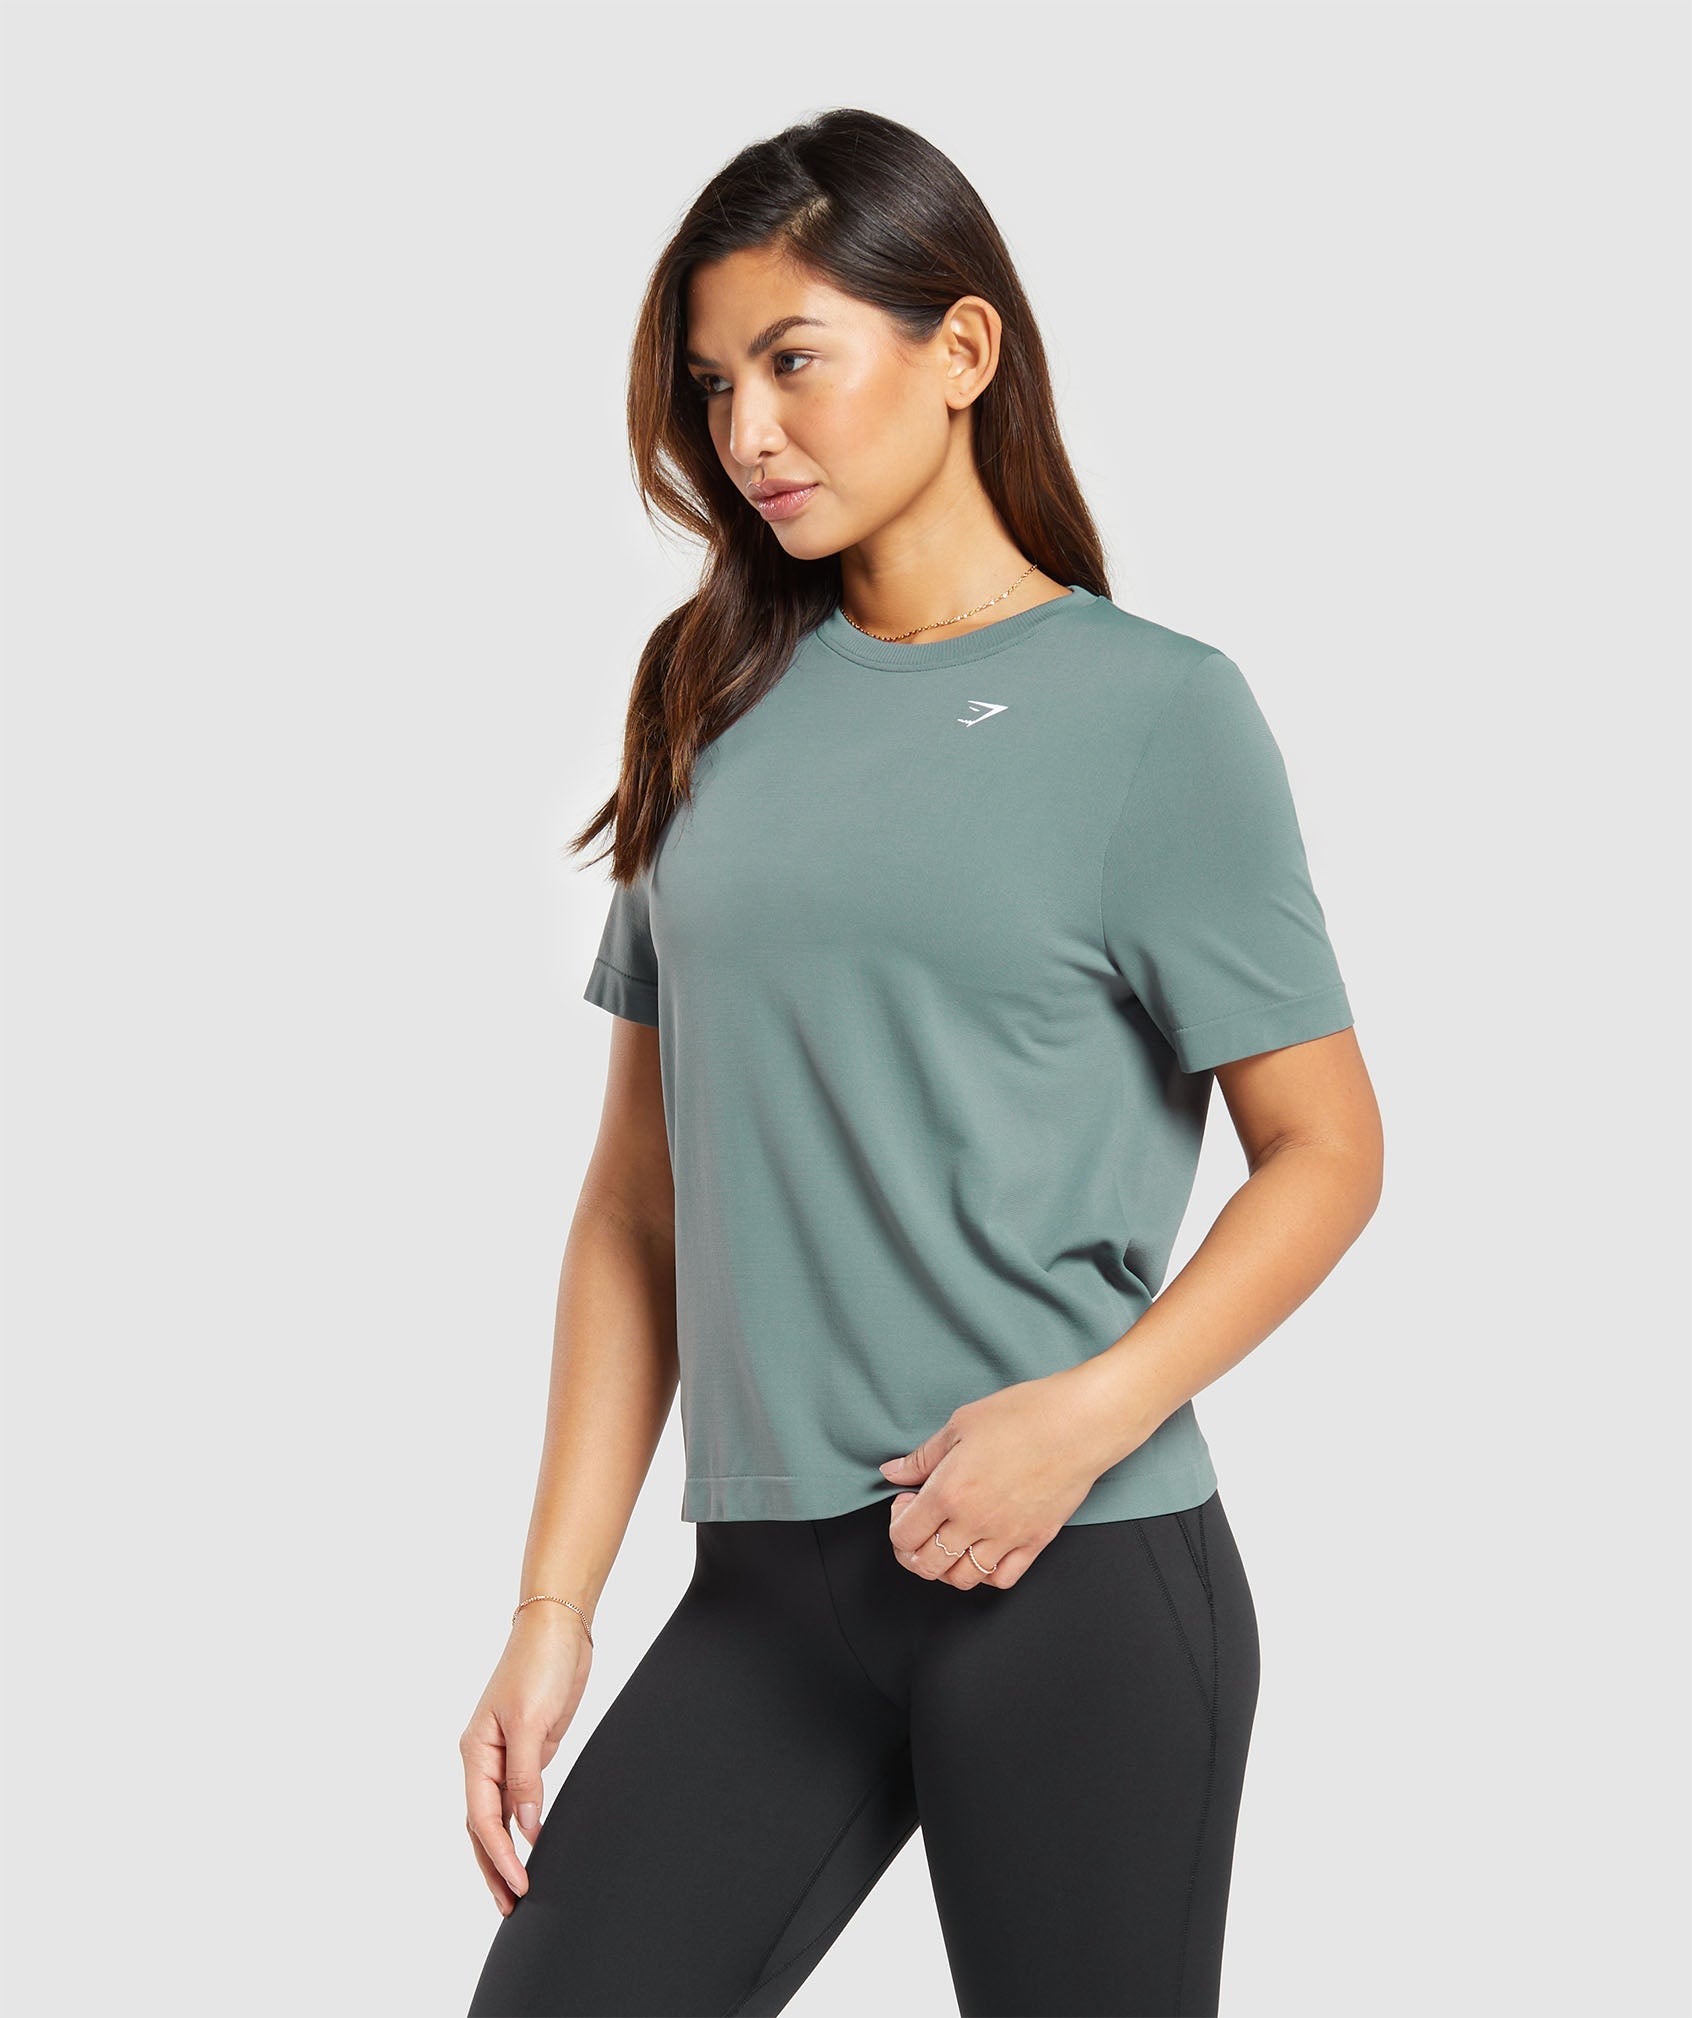 Everyday Seamless T-Shirt in Cargo Teal - view 3